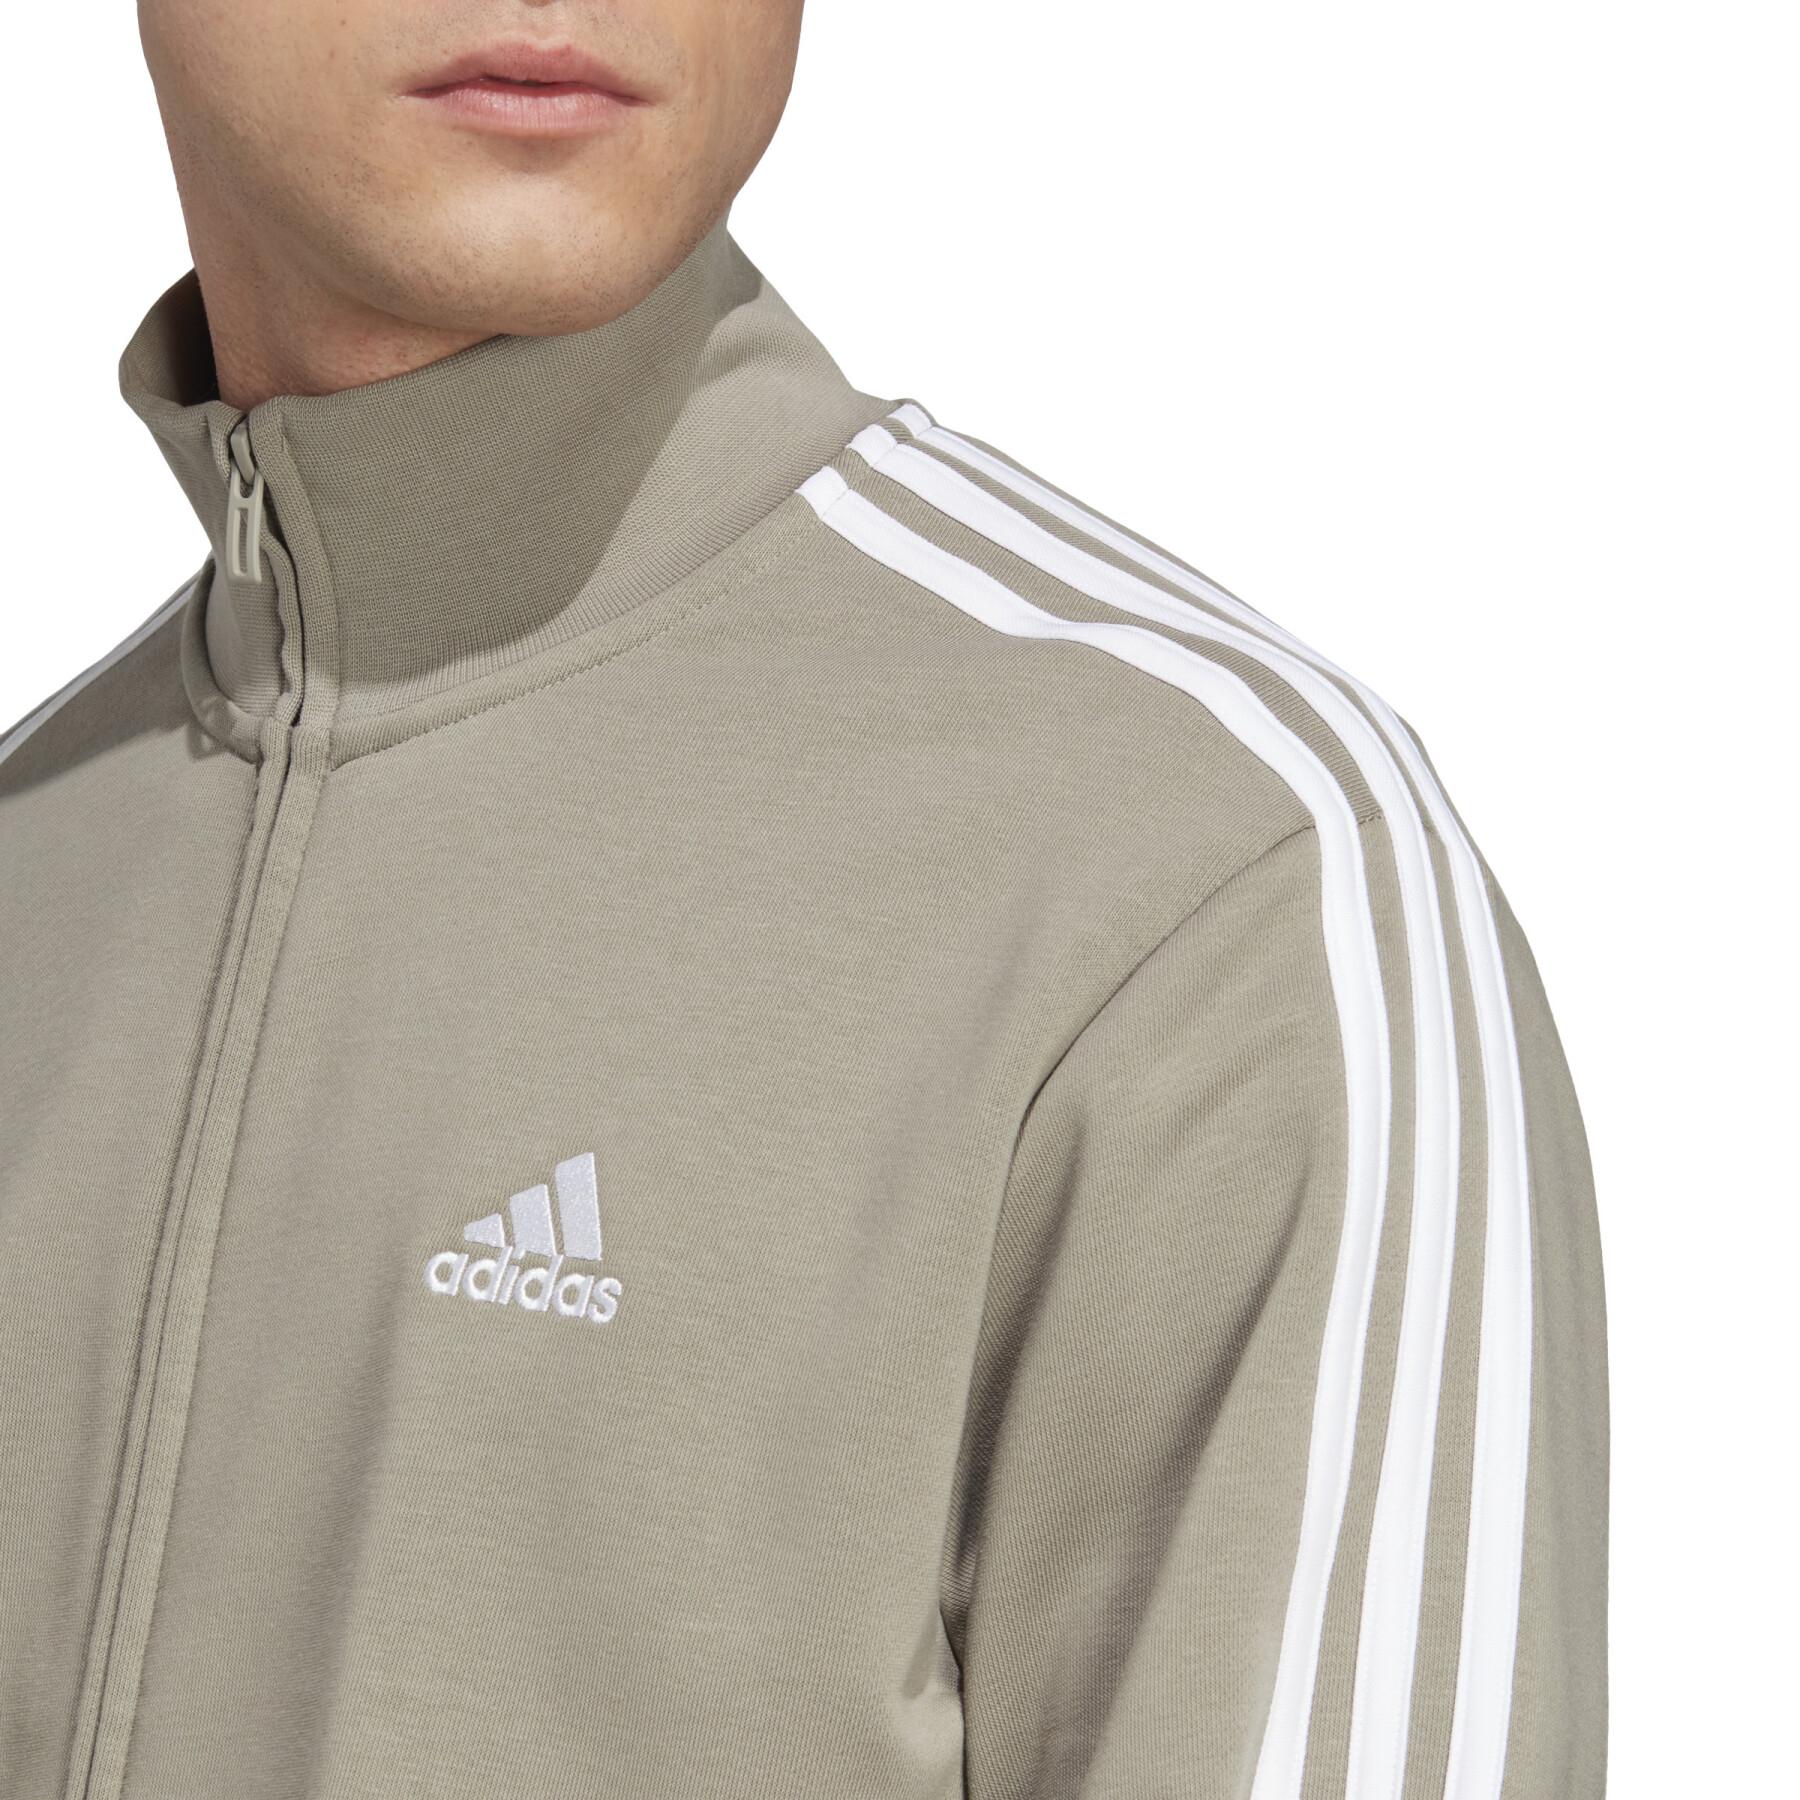 Survêtement adidas Basic 3-Stripes French Terry